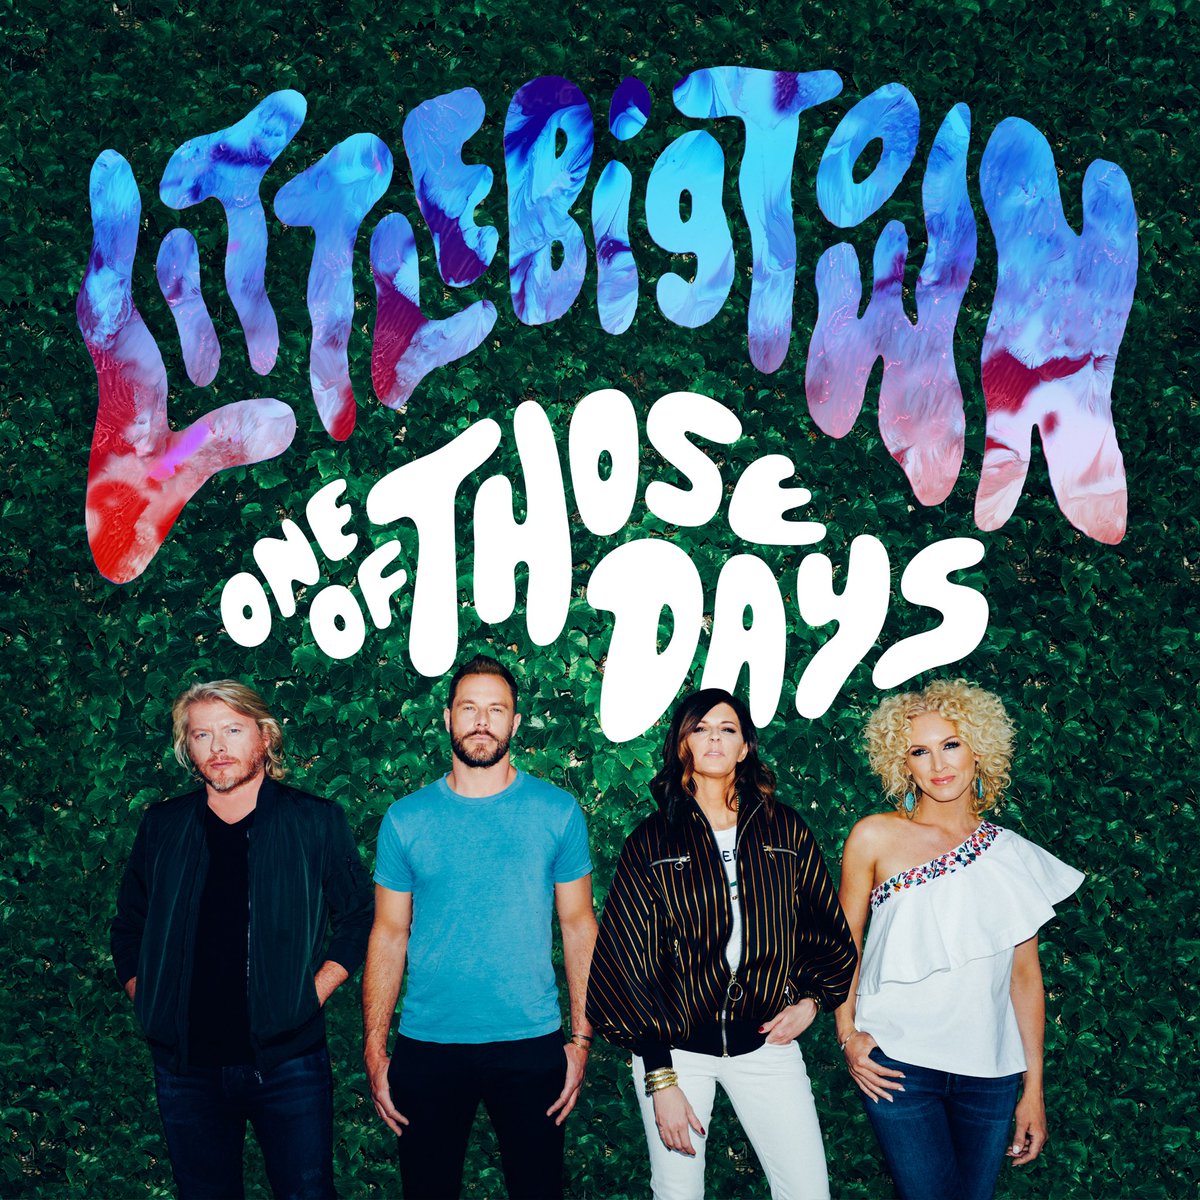 RT @littlebigtown: We had such a blast working with our friend @Pharrell! Check out #OneOfThoseDays now!

https://t.co/xueK7FYiBf https://t…